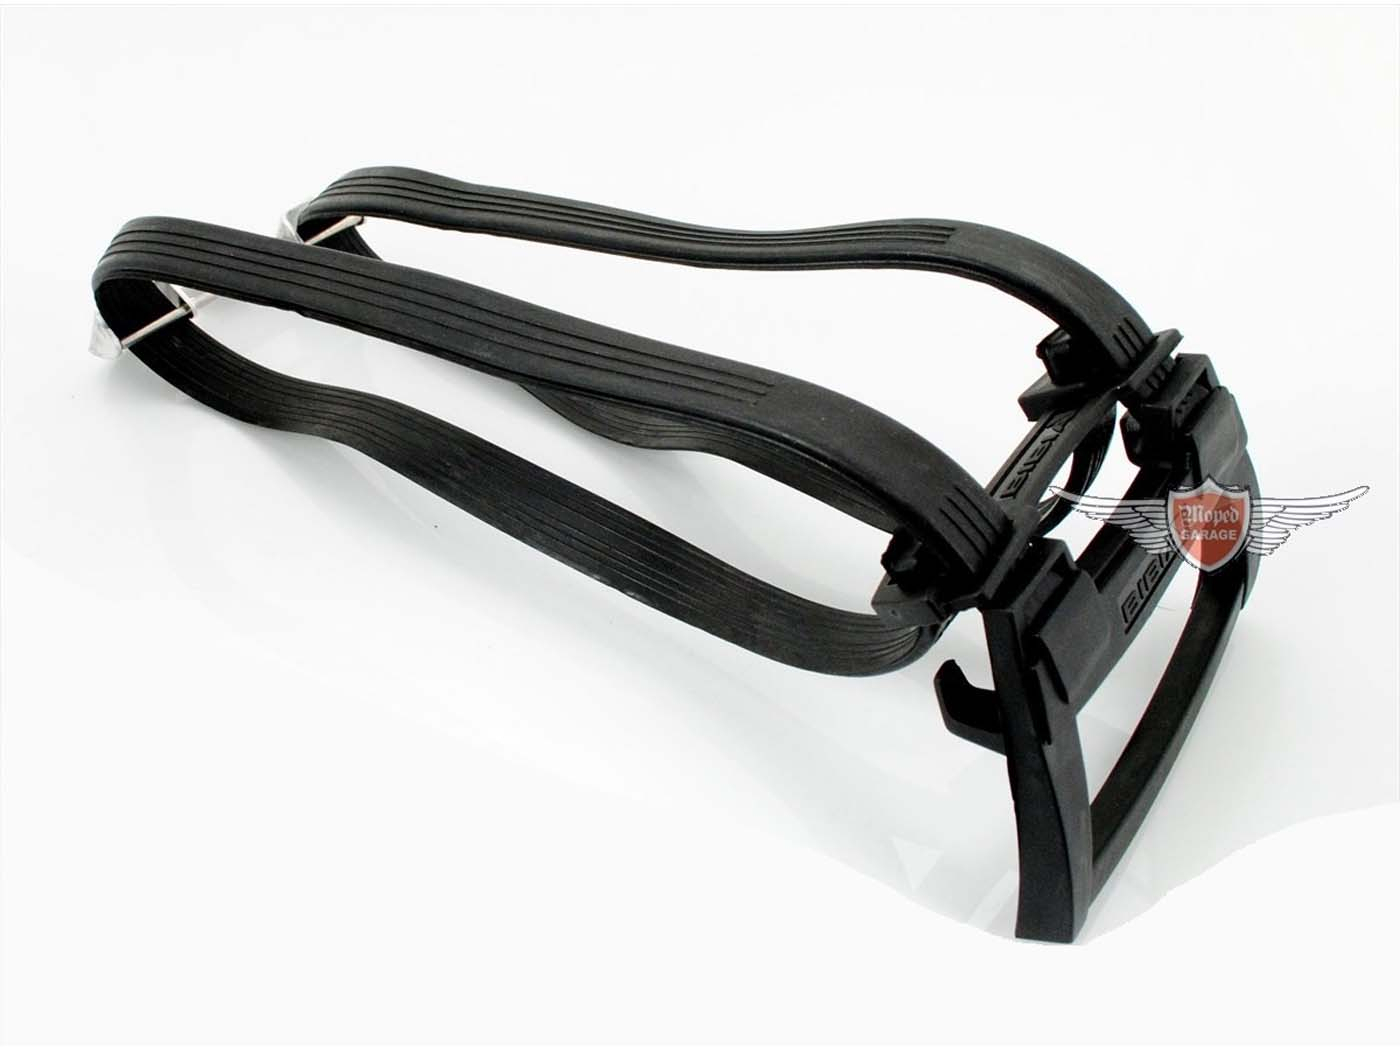 Rubber Luggage Rack For Hercules Saxonette Spartament Moped